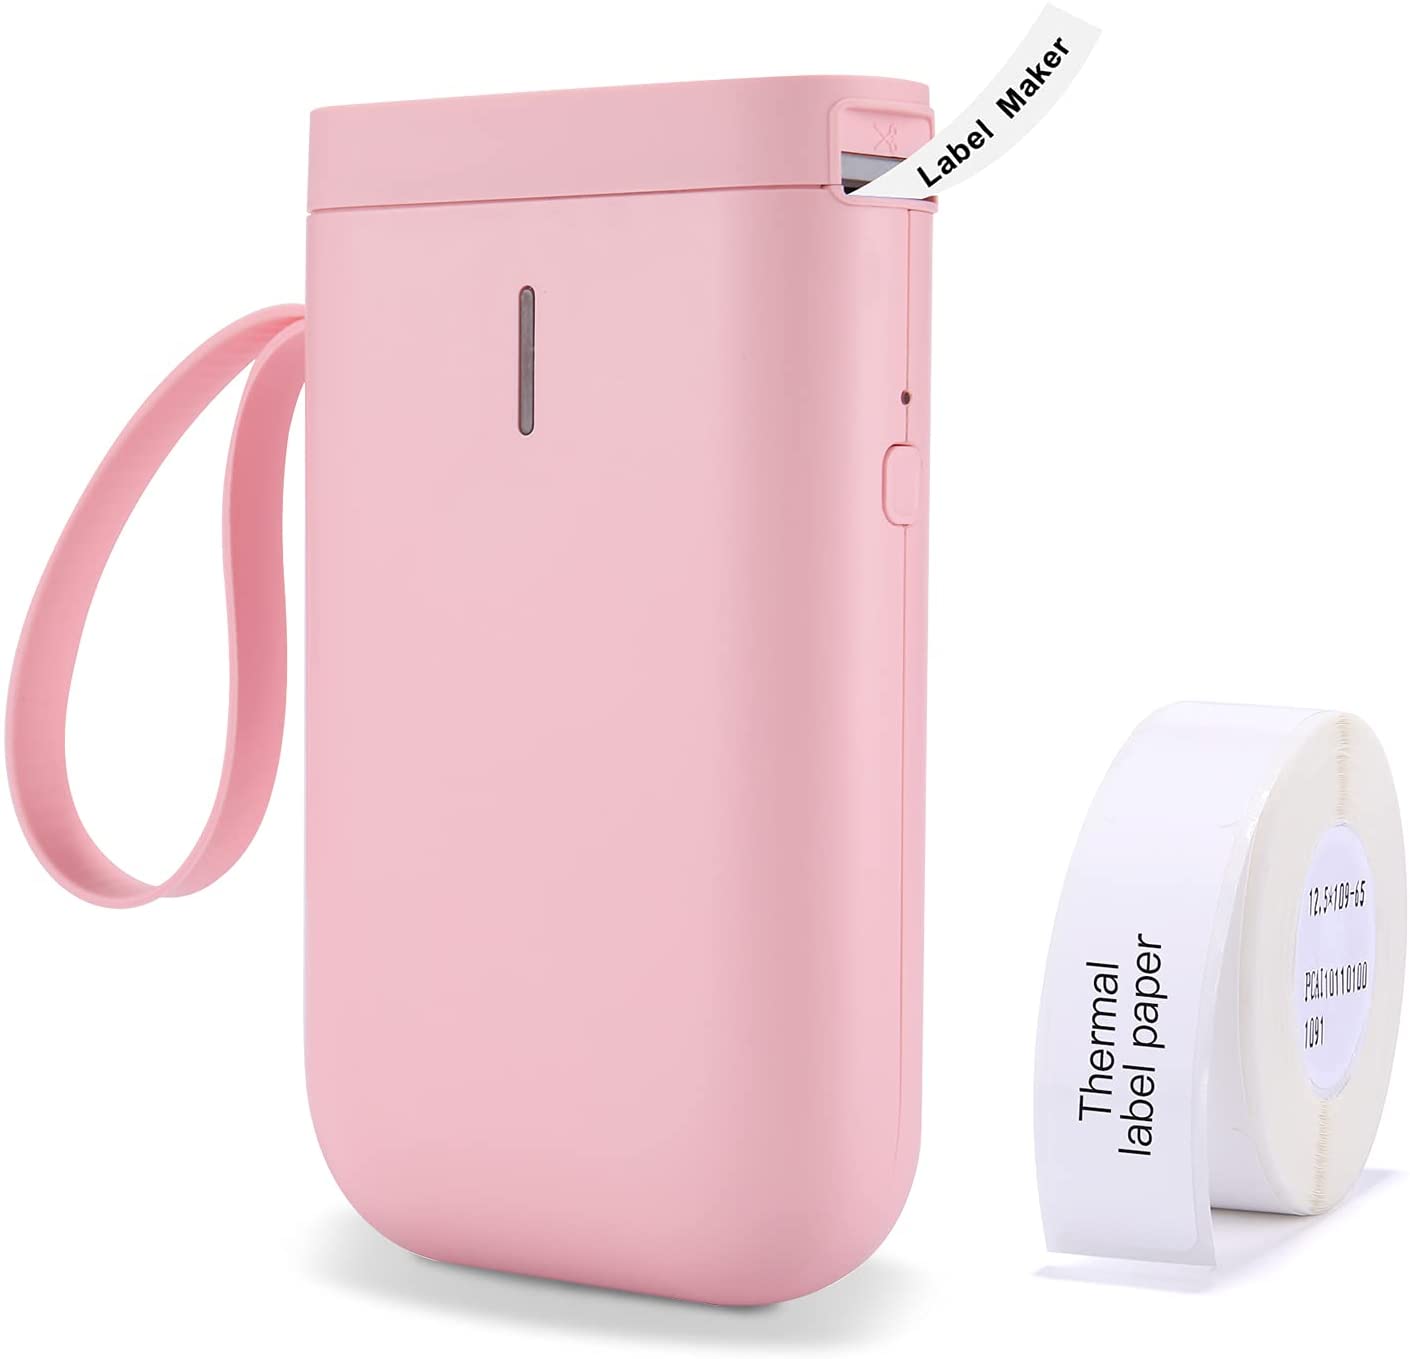 Pink) Label Maker with Adhesive Tape, Wireless, Bluetooth, Portable, Cute,  Transparent, Inkless Sticker Label Printer with Different Fonts Walmart  Canada